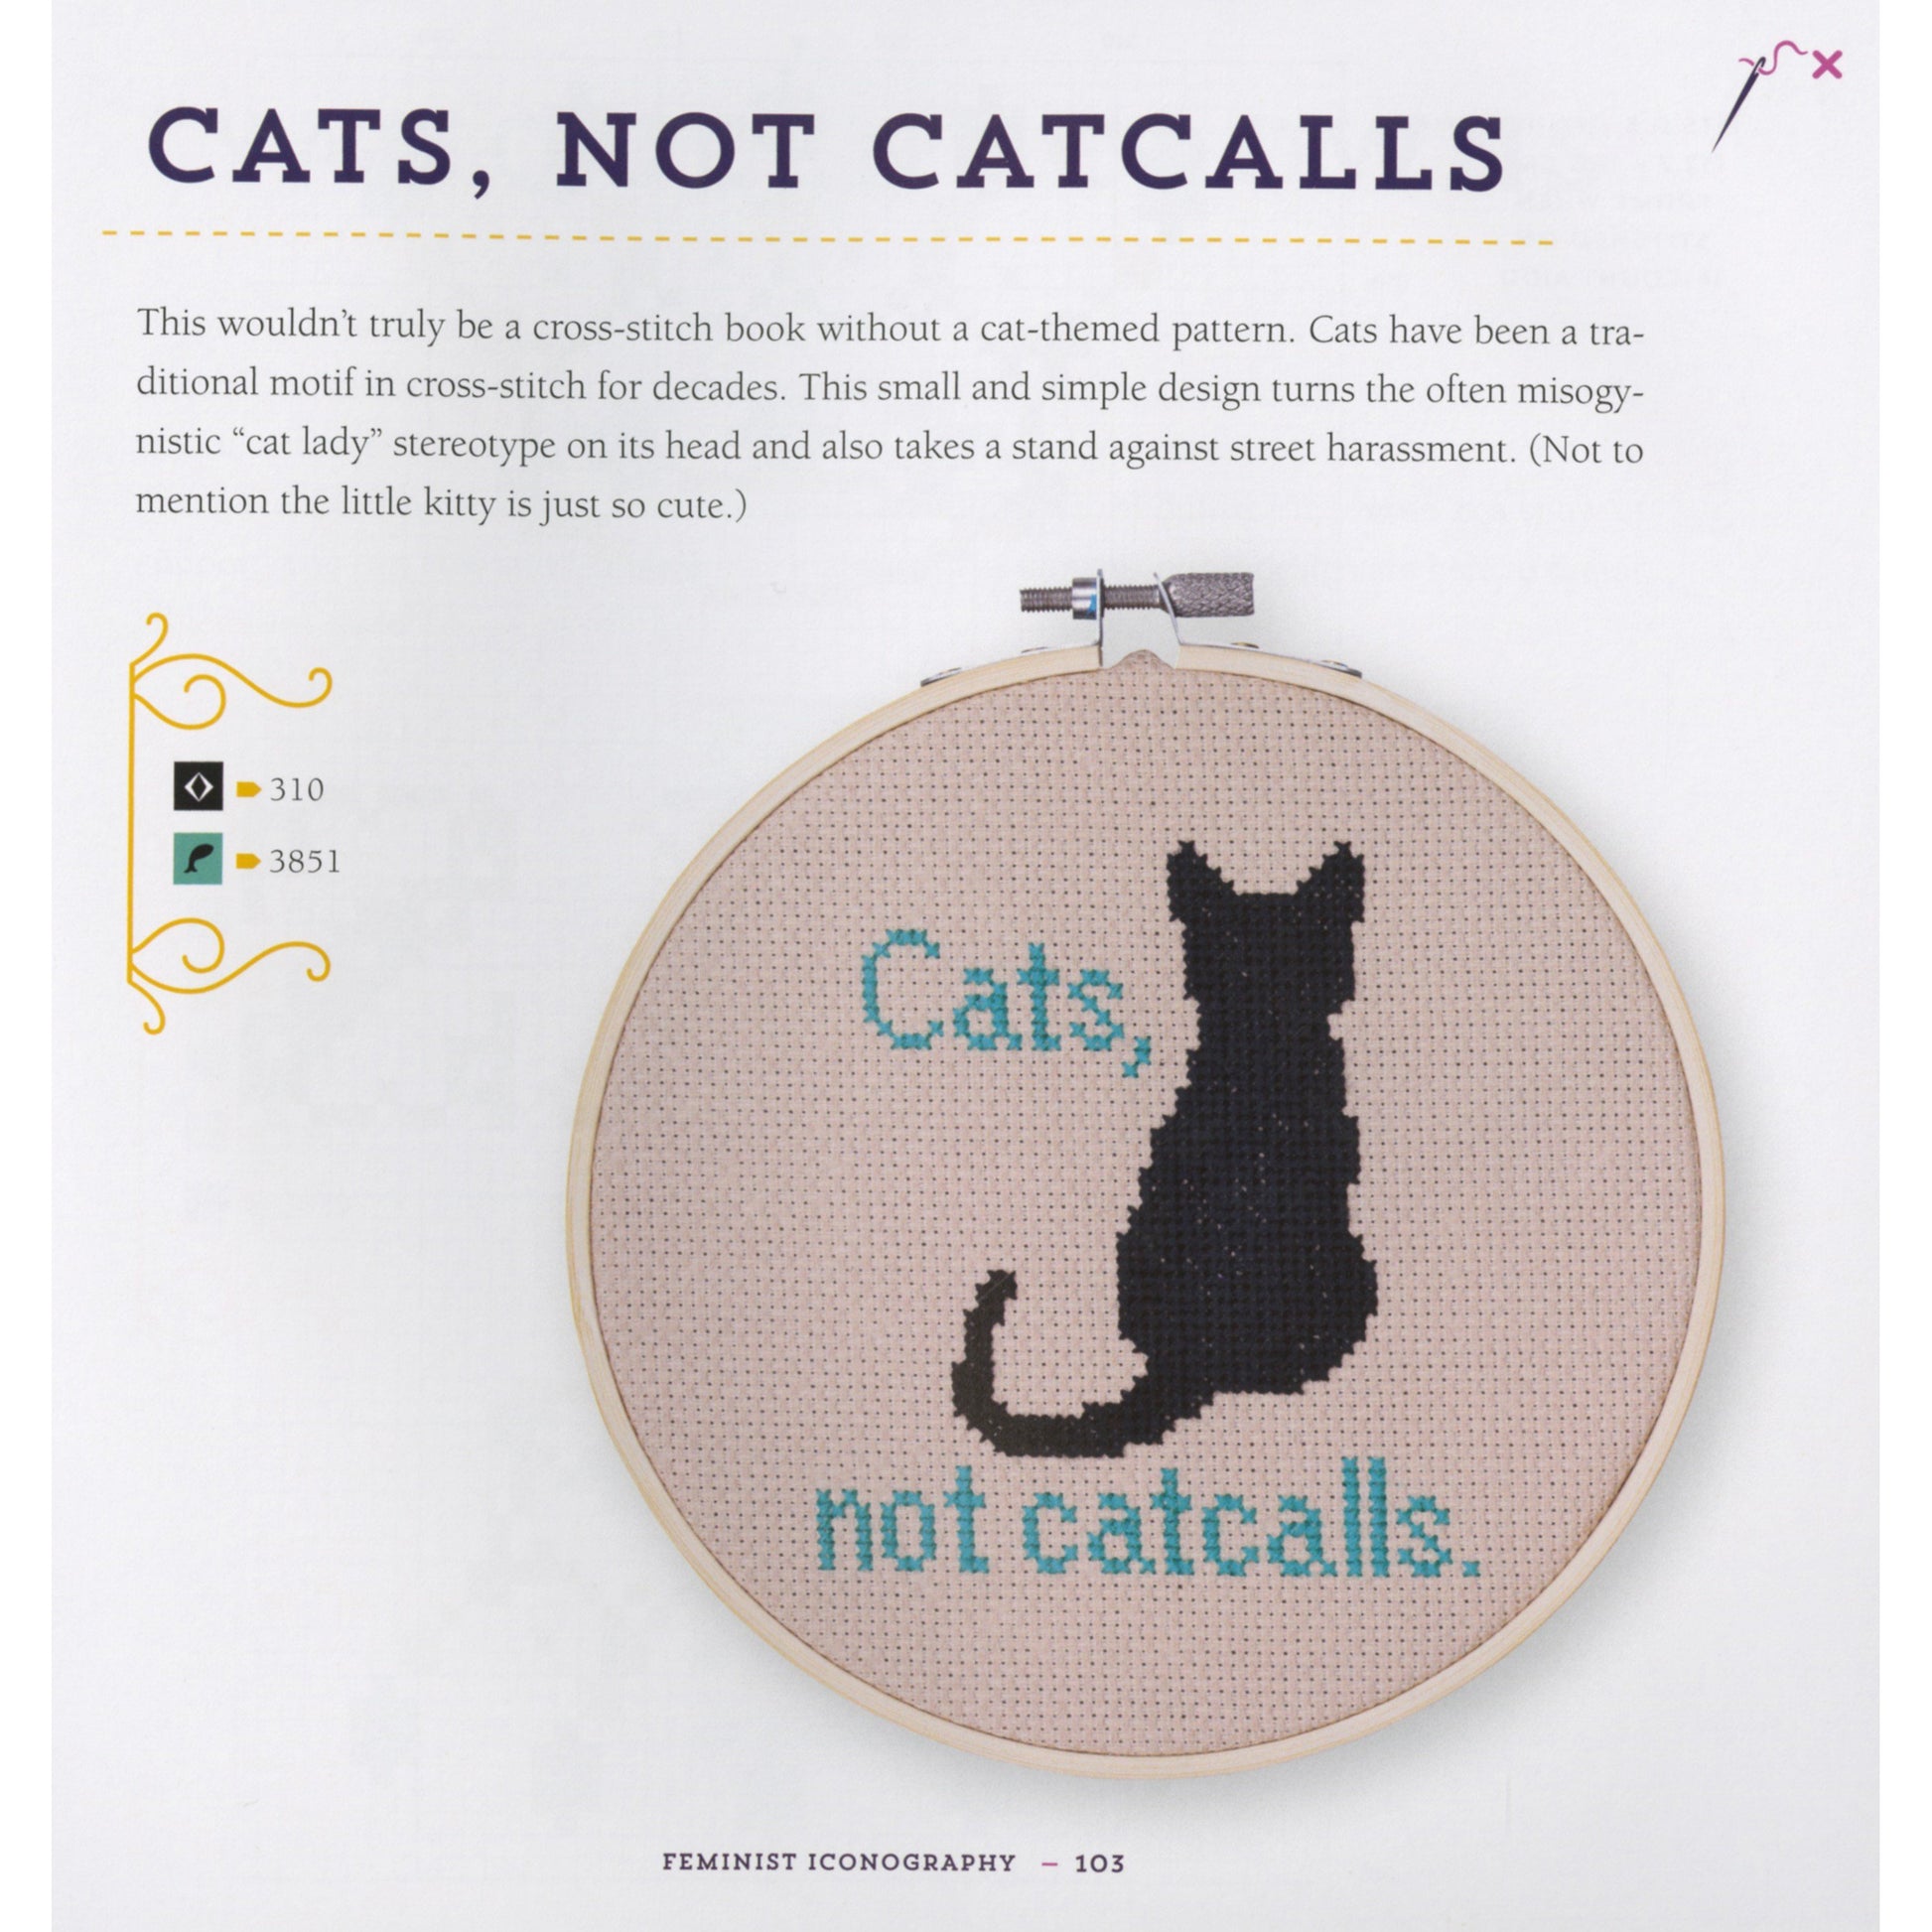 Sassy Cat Crewel Embroidery Kit - Needlework Projects, Tools